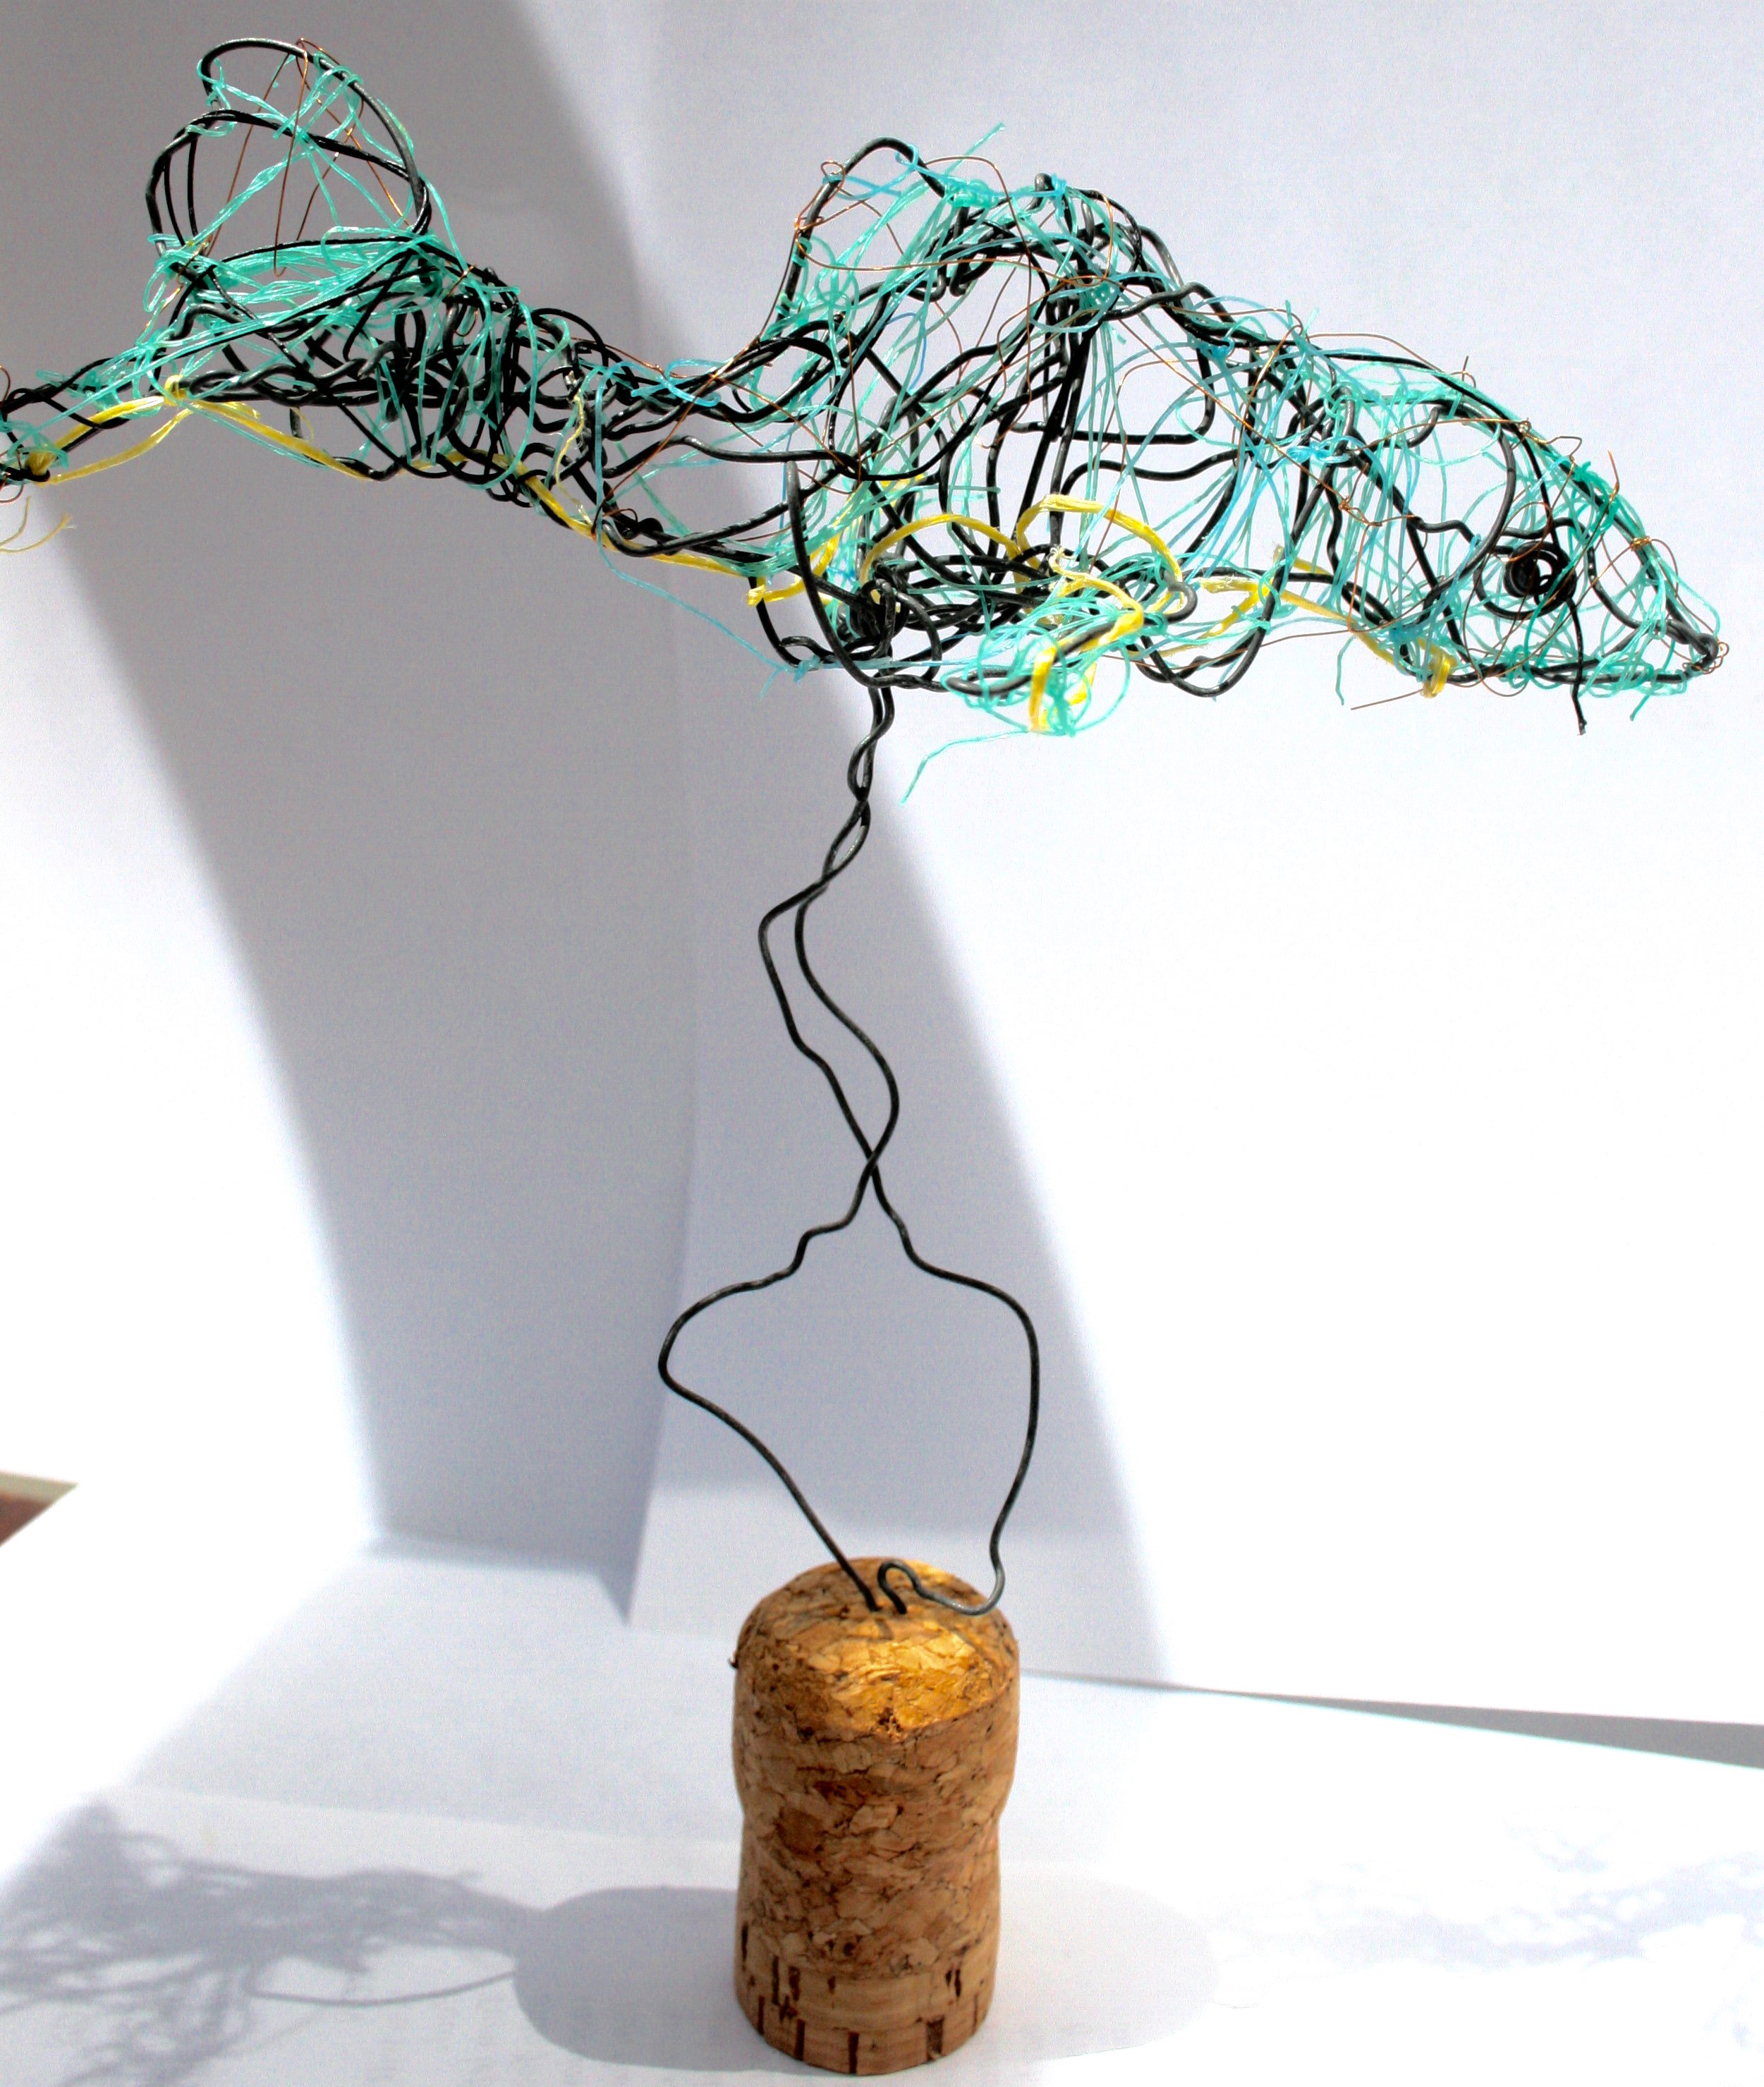 Katrina Slack on X: Fish made from ghost fishing line wire and